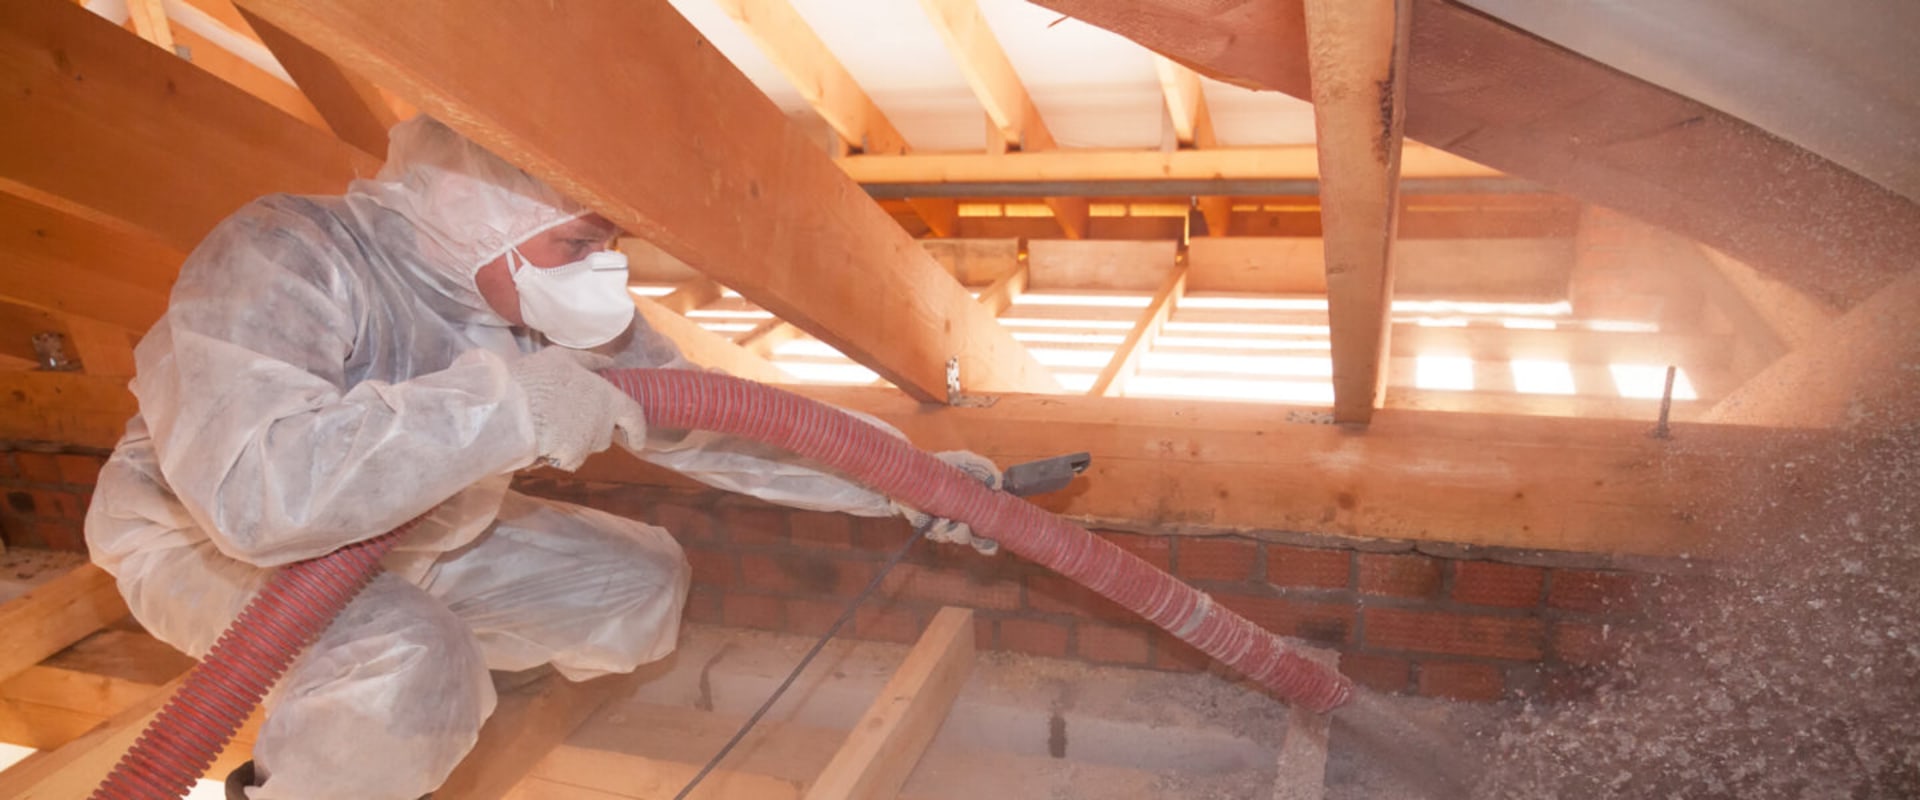 Attic Insulation Installation Services: Get the Best Results with Attic Guys